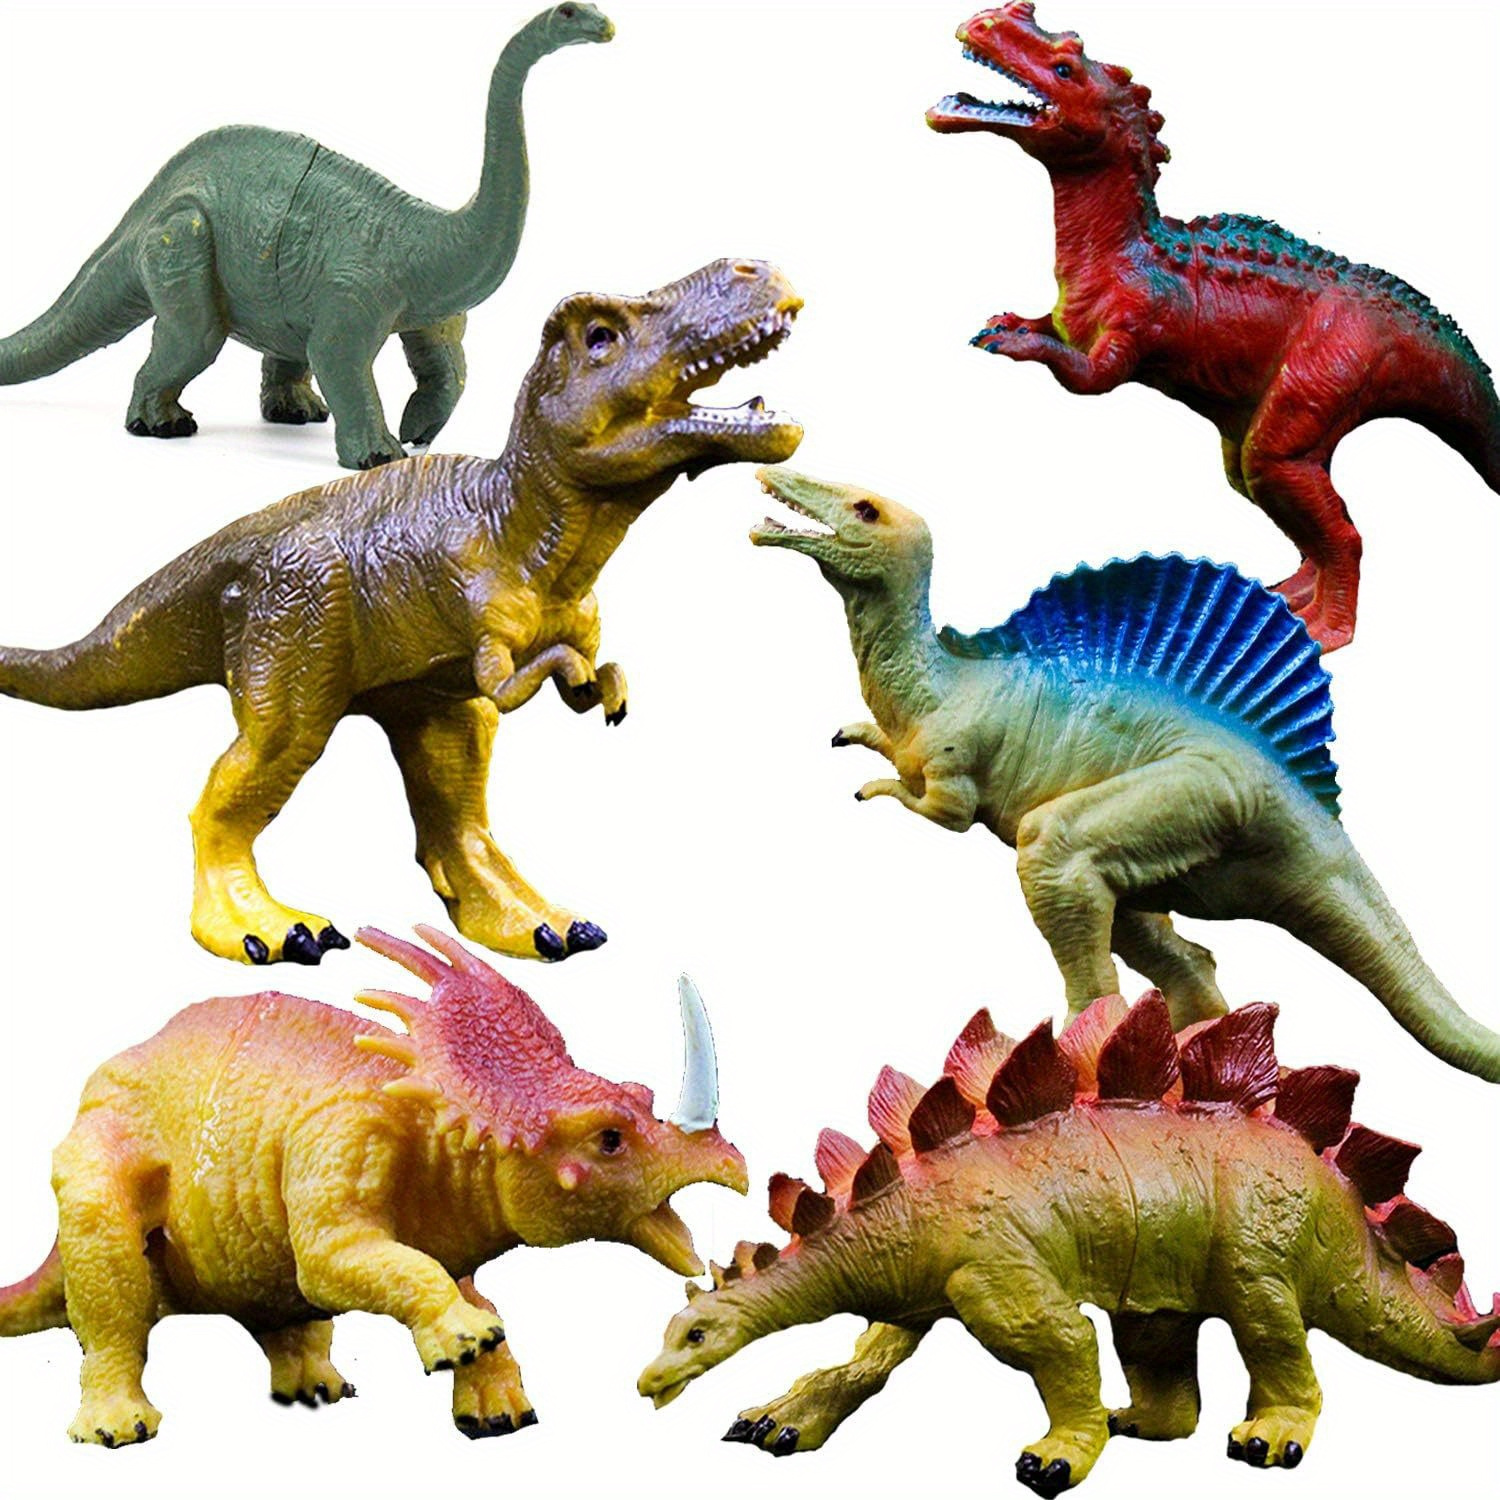 

6pcs Dinosaur Toy Set - Realistic Large Plastic Dinosaur Figures For Kids, Play, Education - Includes T-rex, Stegosaurus & More - Durable, Non-feathered, No Electricity Needed